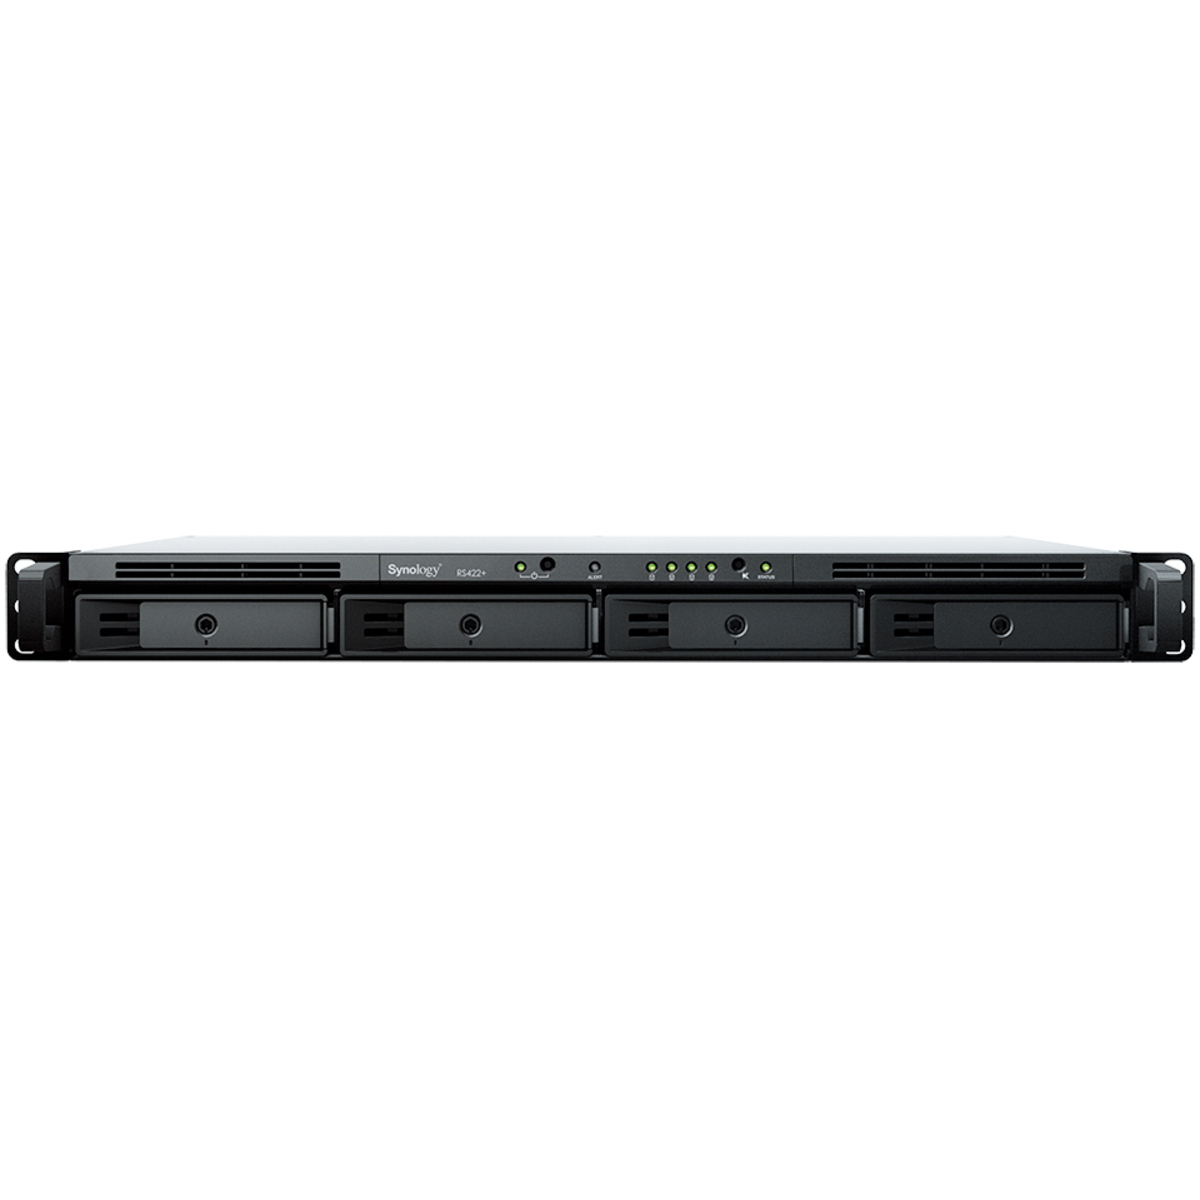 Synology RackStation RS422+ 18tb 4-Bay RackMount Personal / Basic Home / Small Office NAS - Network Attached Storage Device 3x6tb Western Digital Red WD60EFAX 3.5 5400rpm SATA 6Gb/s HDD NAS Class Drives Installed - Burn-In Tested RackStation RS422+